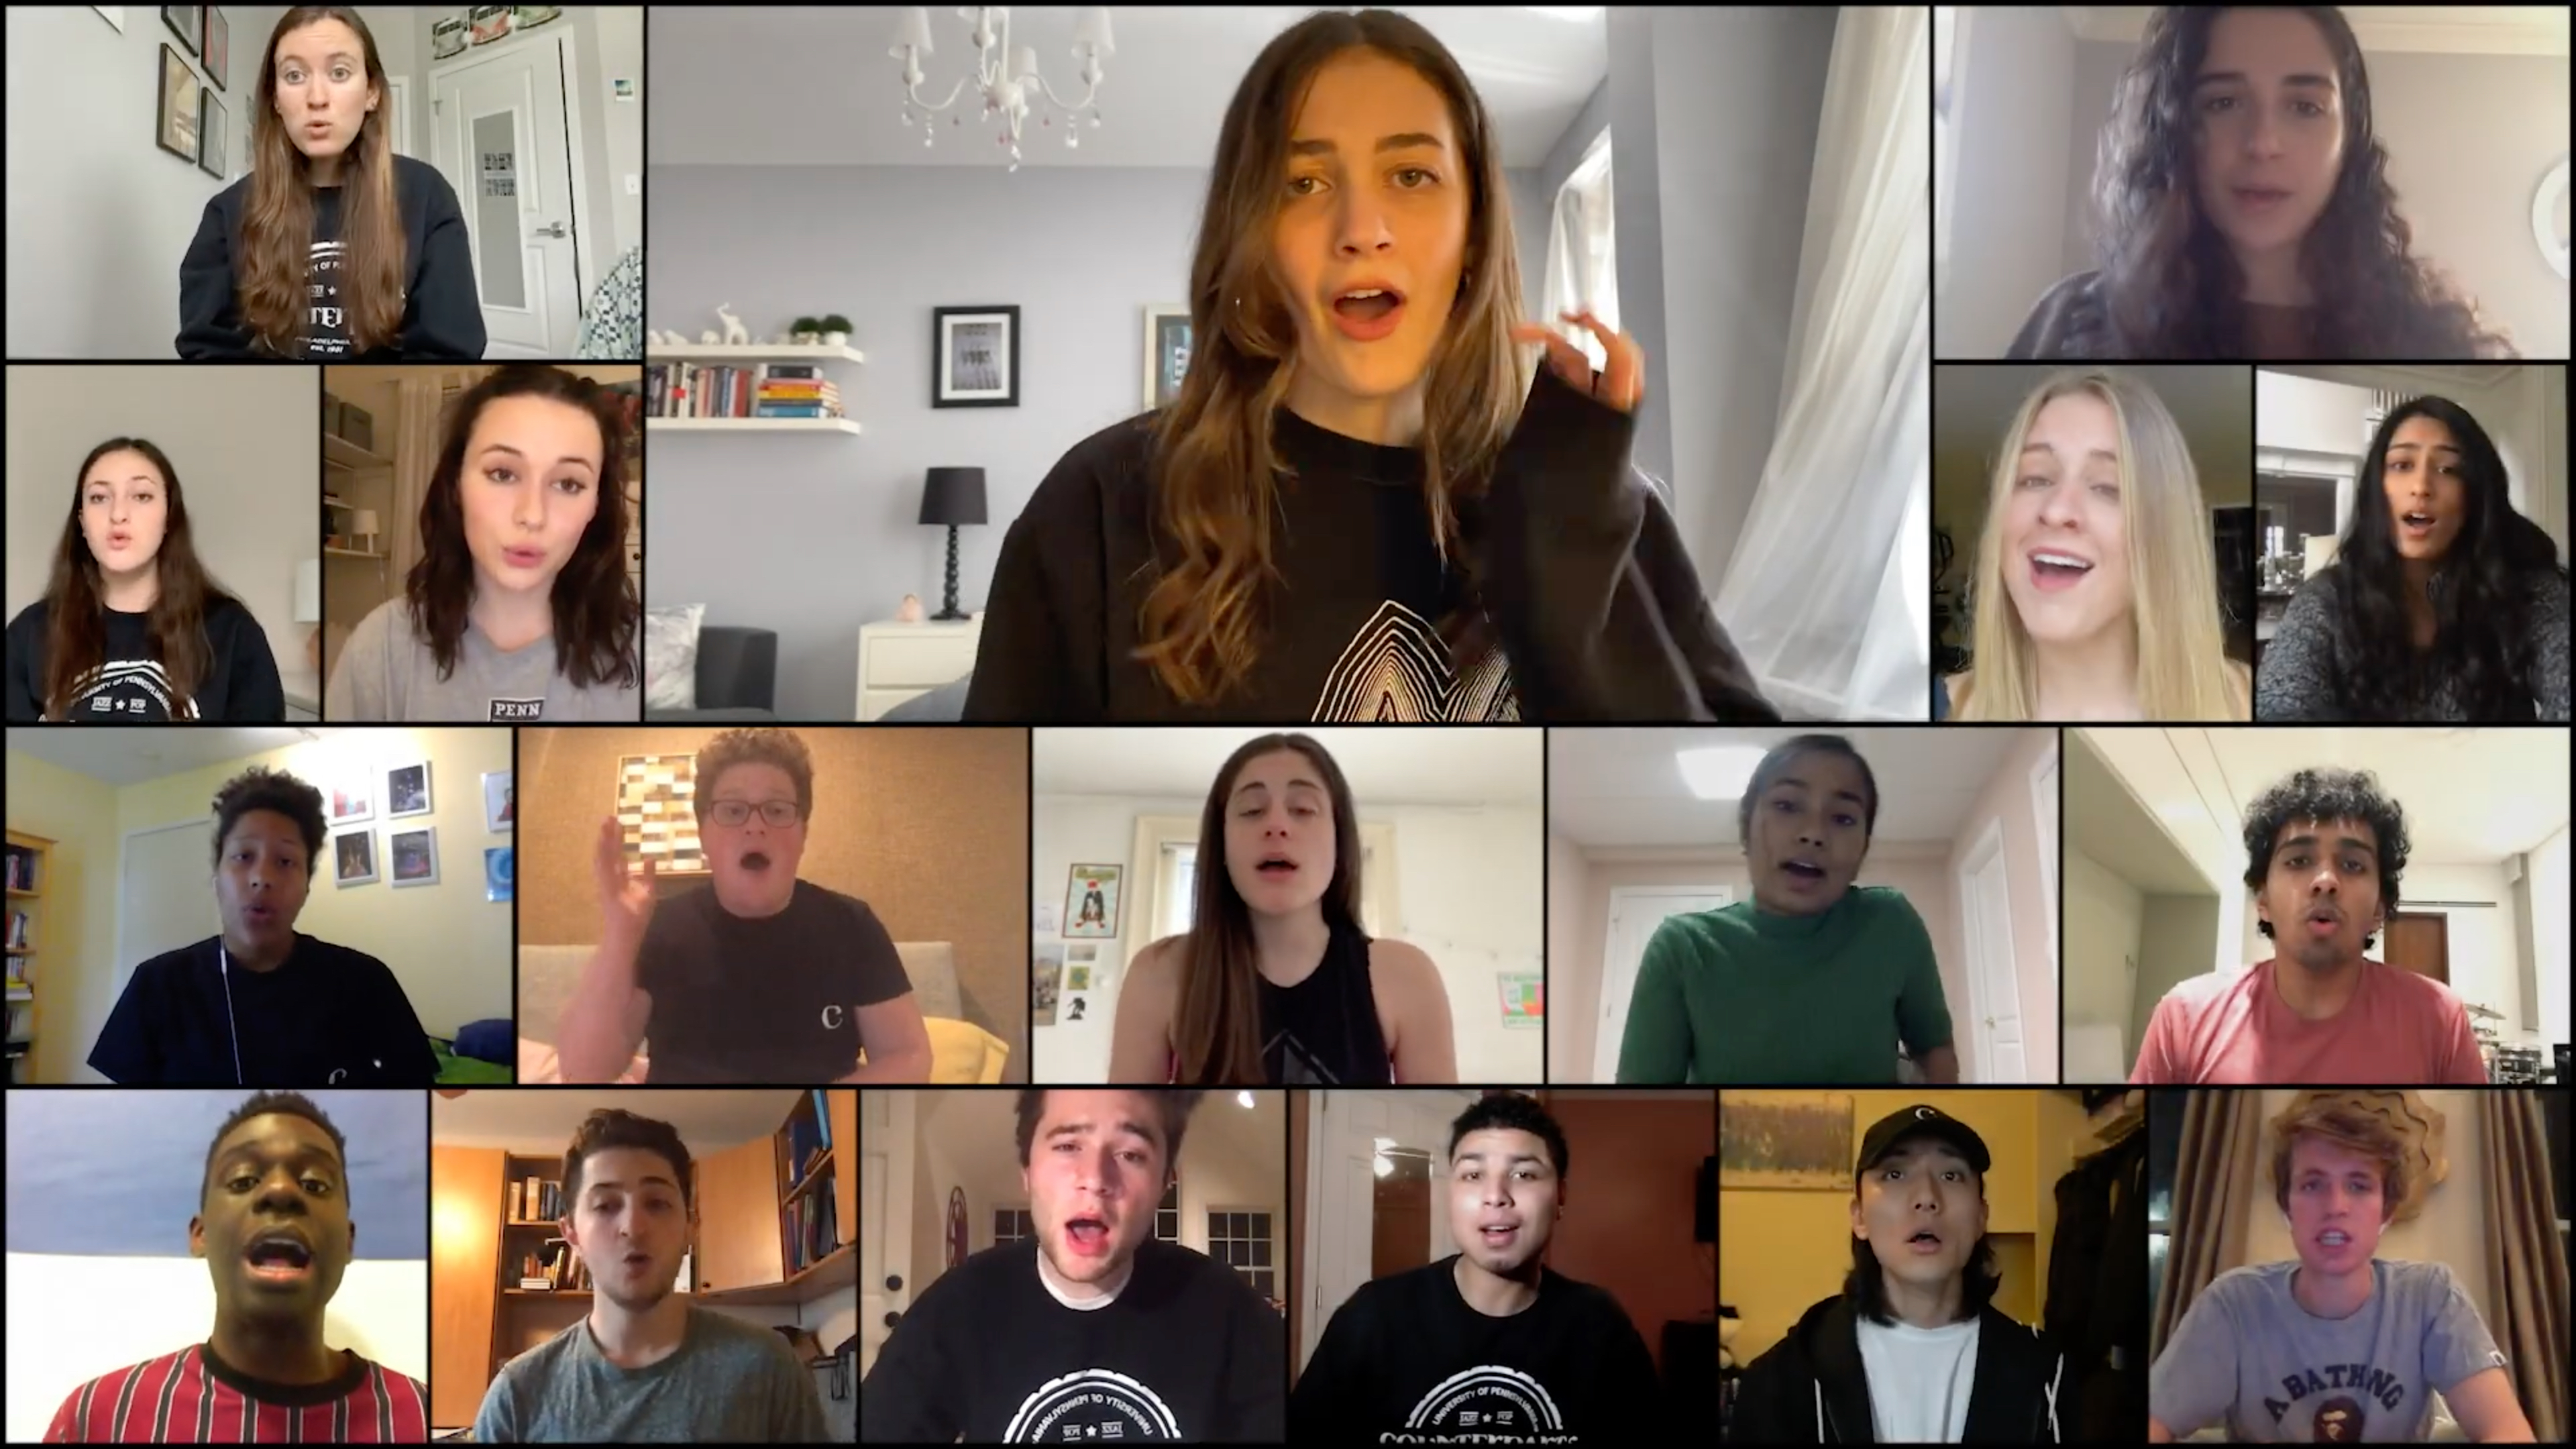 Eighteen students singing in a music video